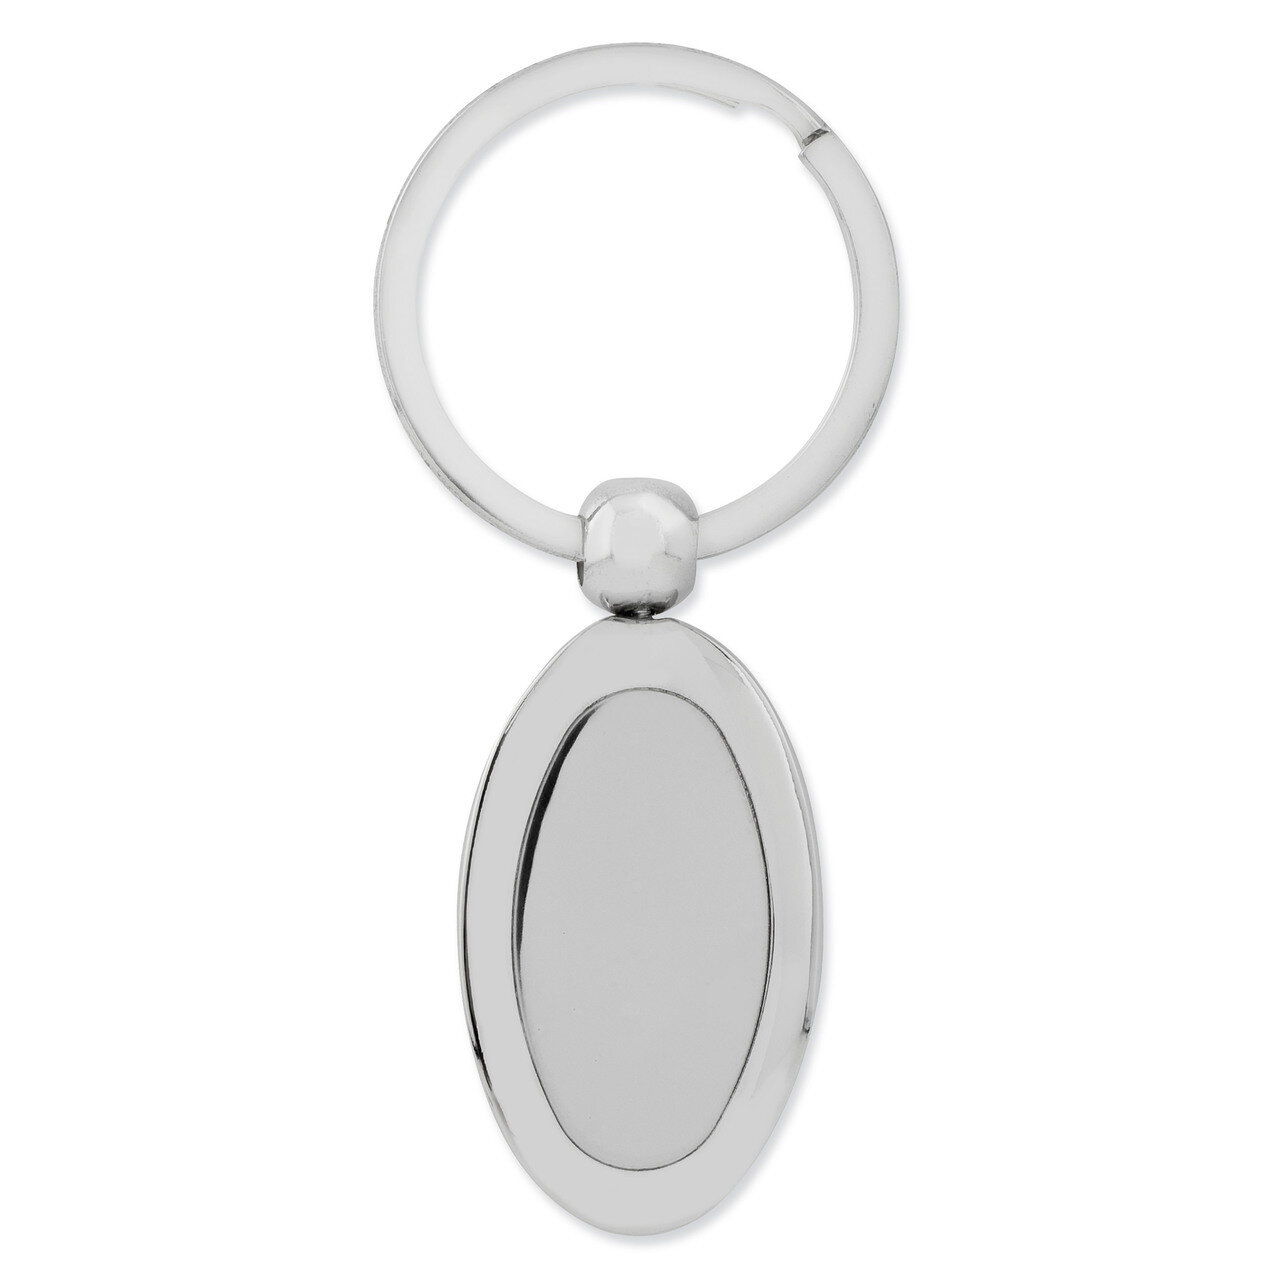 Polished Oval Key Ring Nickel-plated GP2852